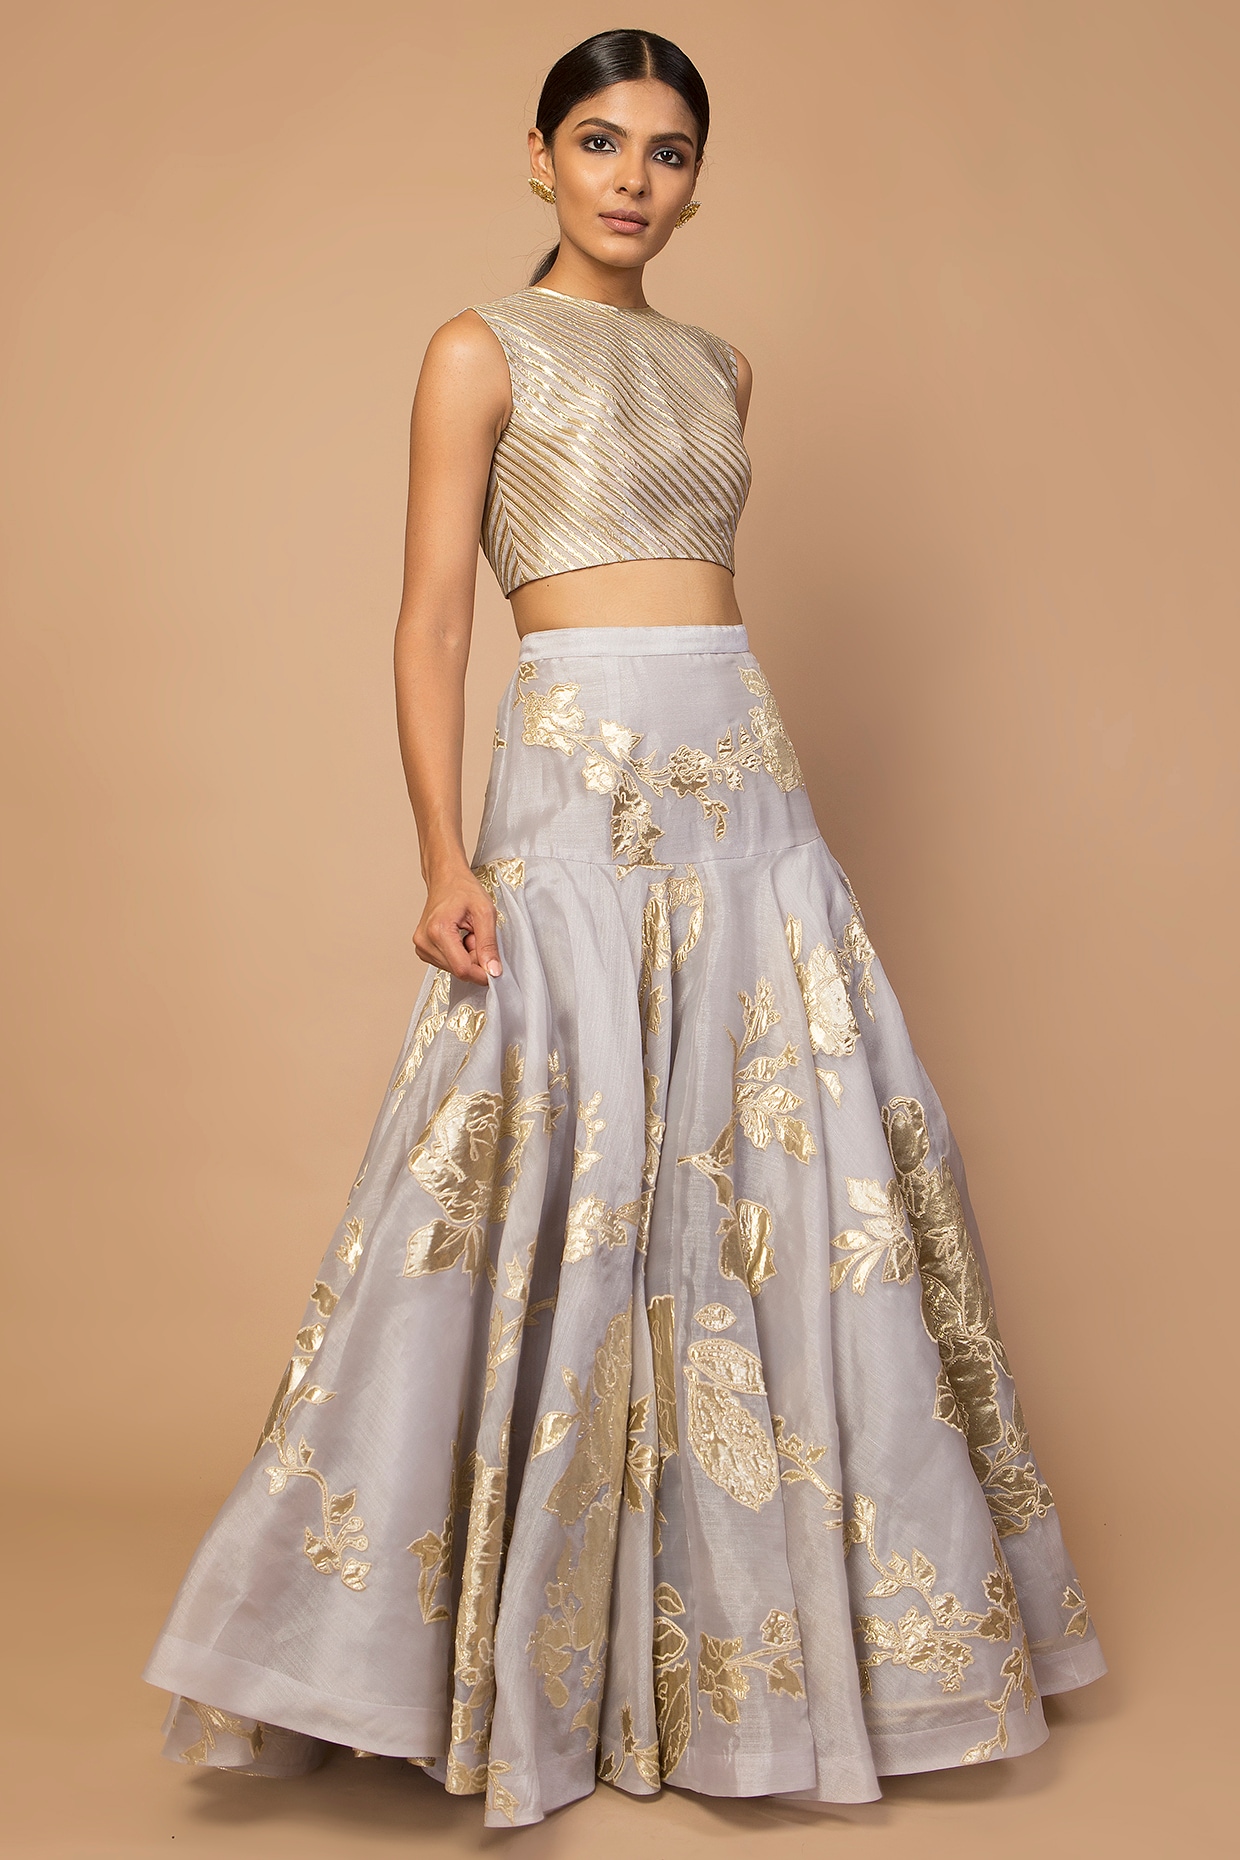 Beautiful Long Skirt with golden print and set with western styled blouse.  | Long skirt outfits, Indian designer outfits, Indian fashion dresses